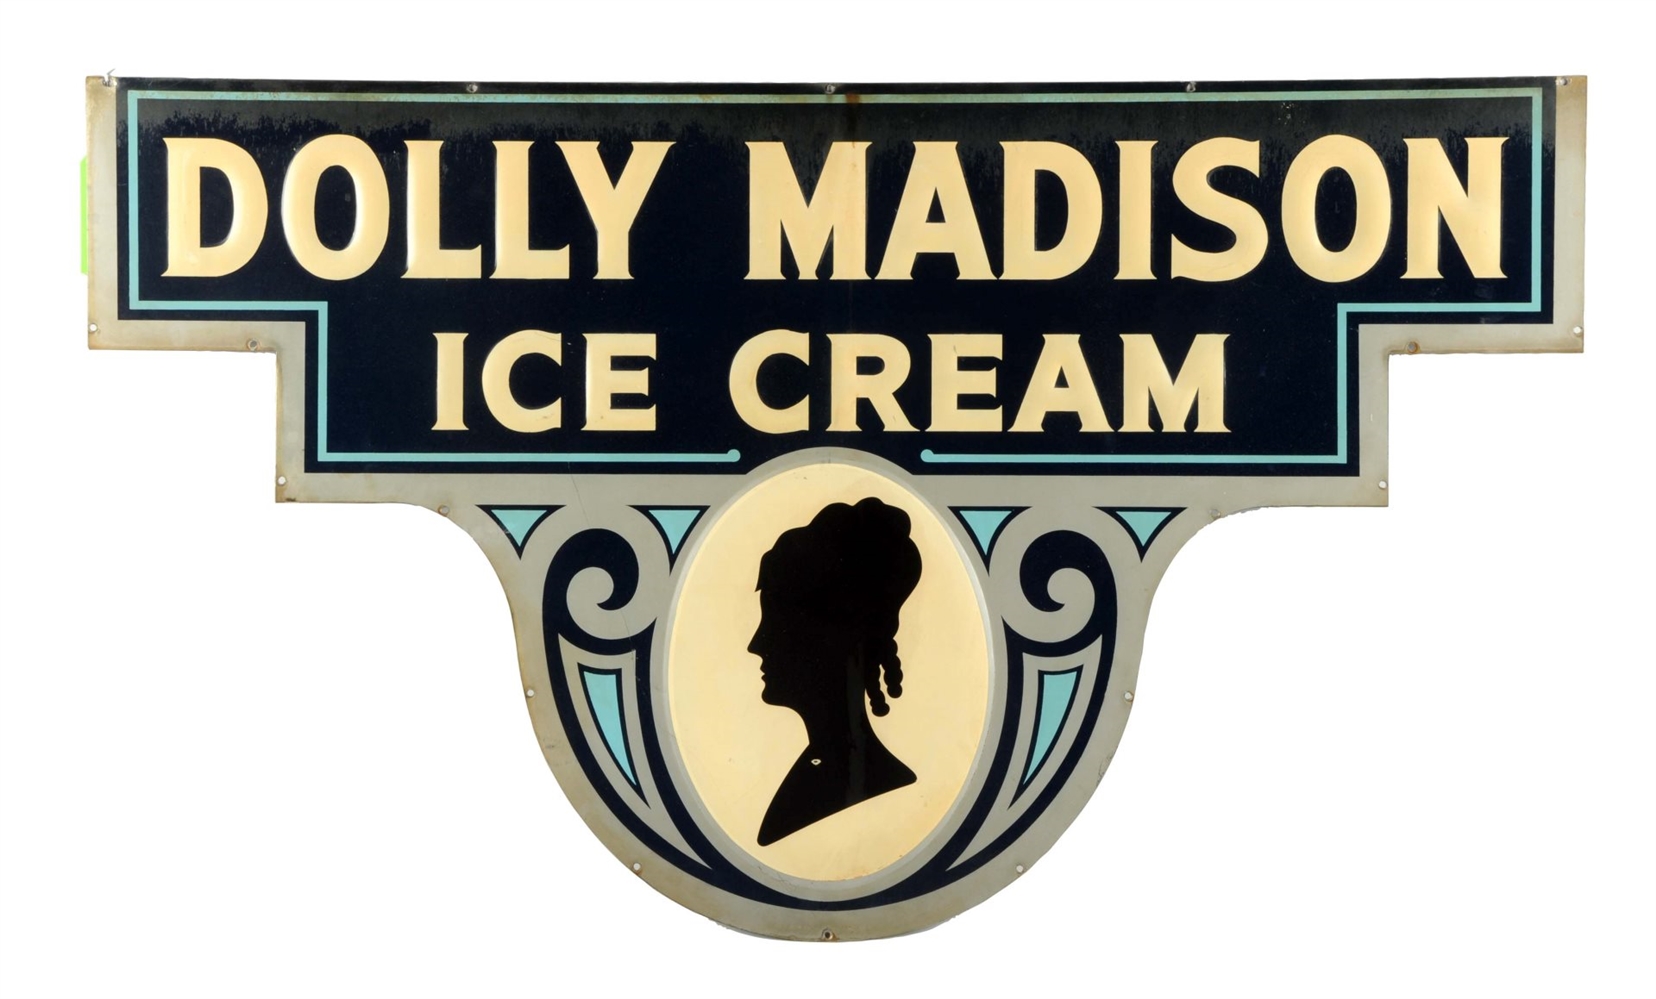 DOLLY MADISON ICE CREAM EMBOSSED TIN SIGN.        